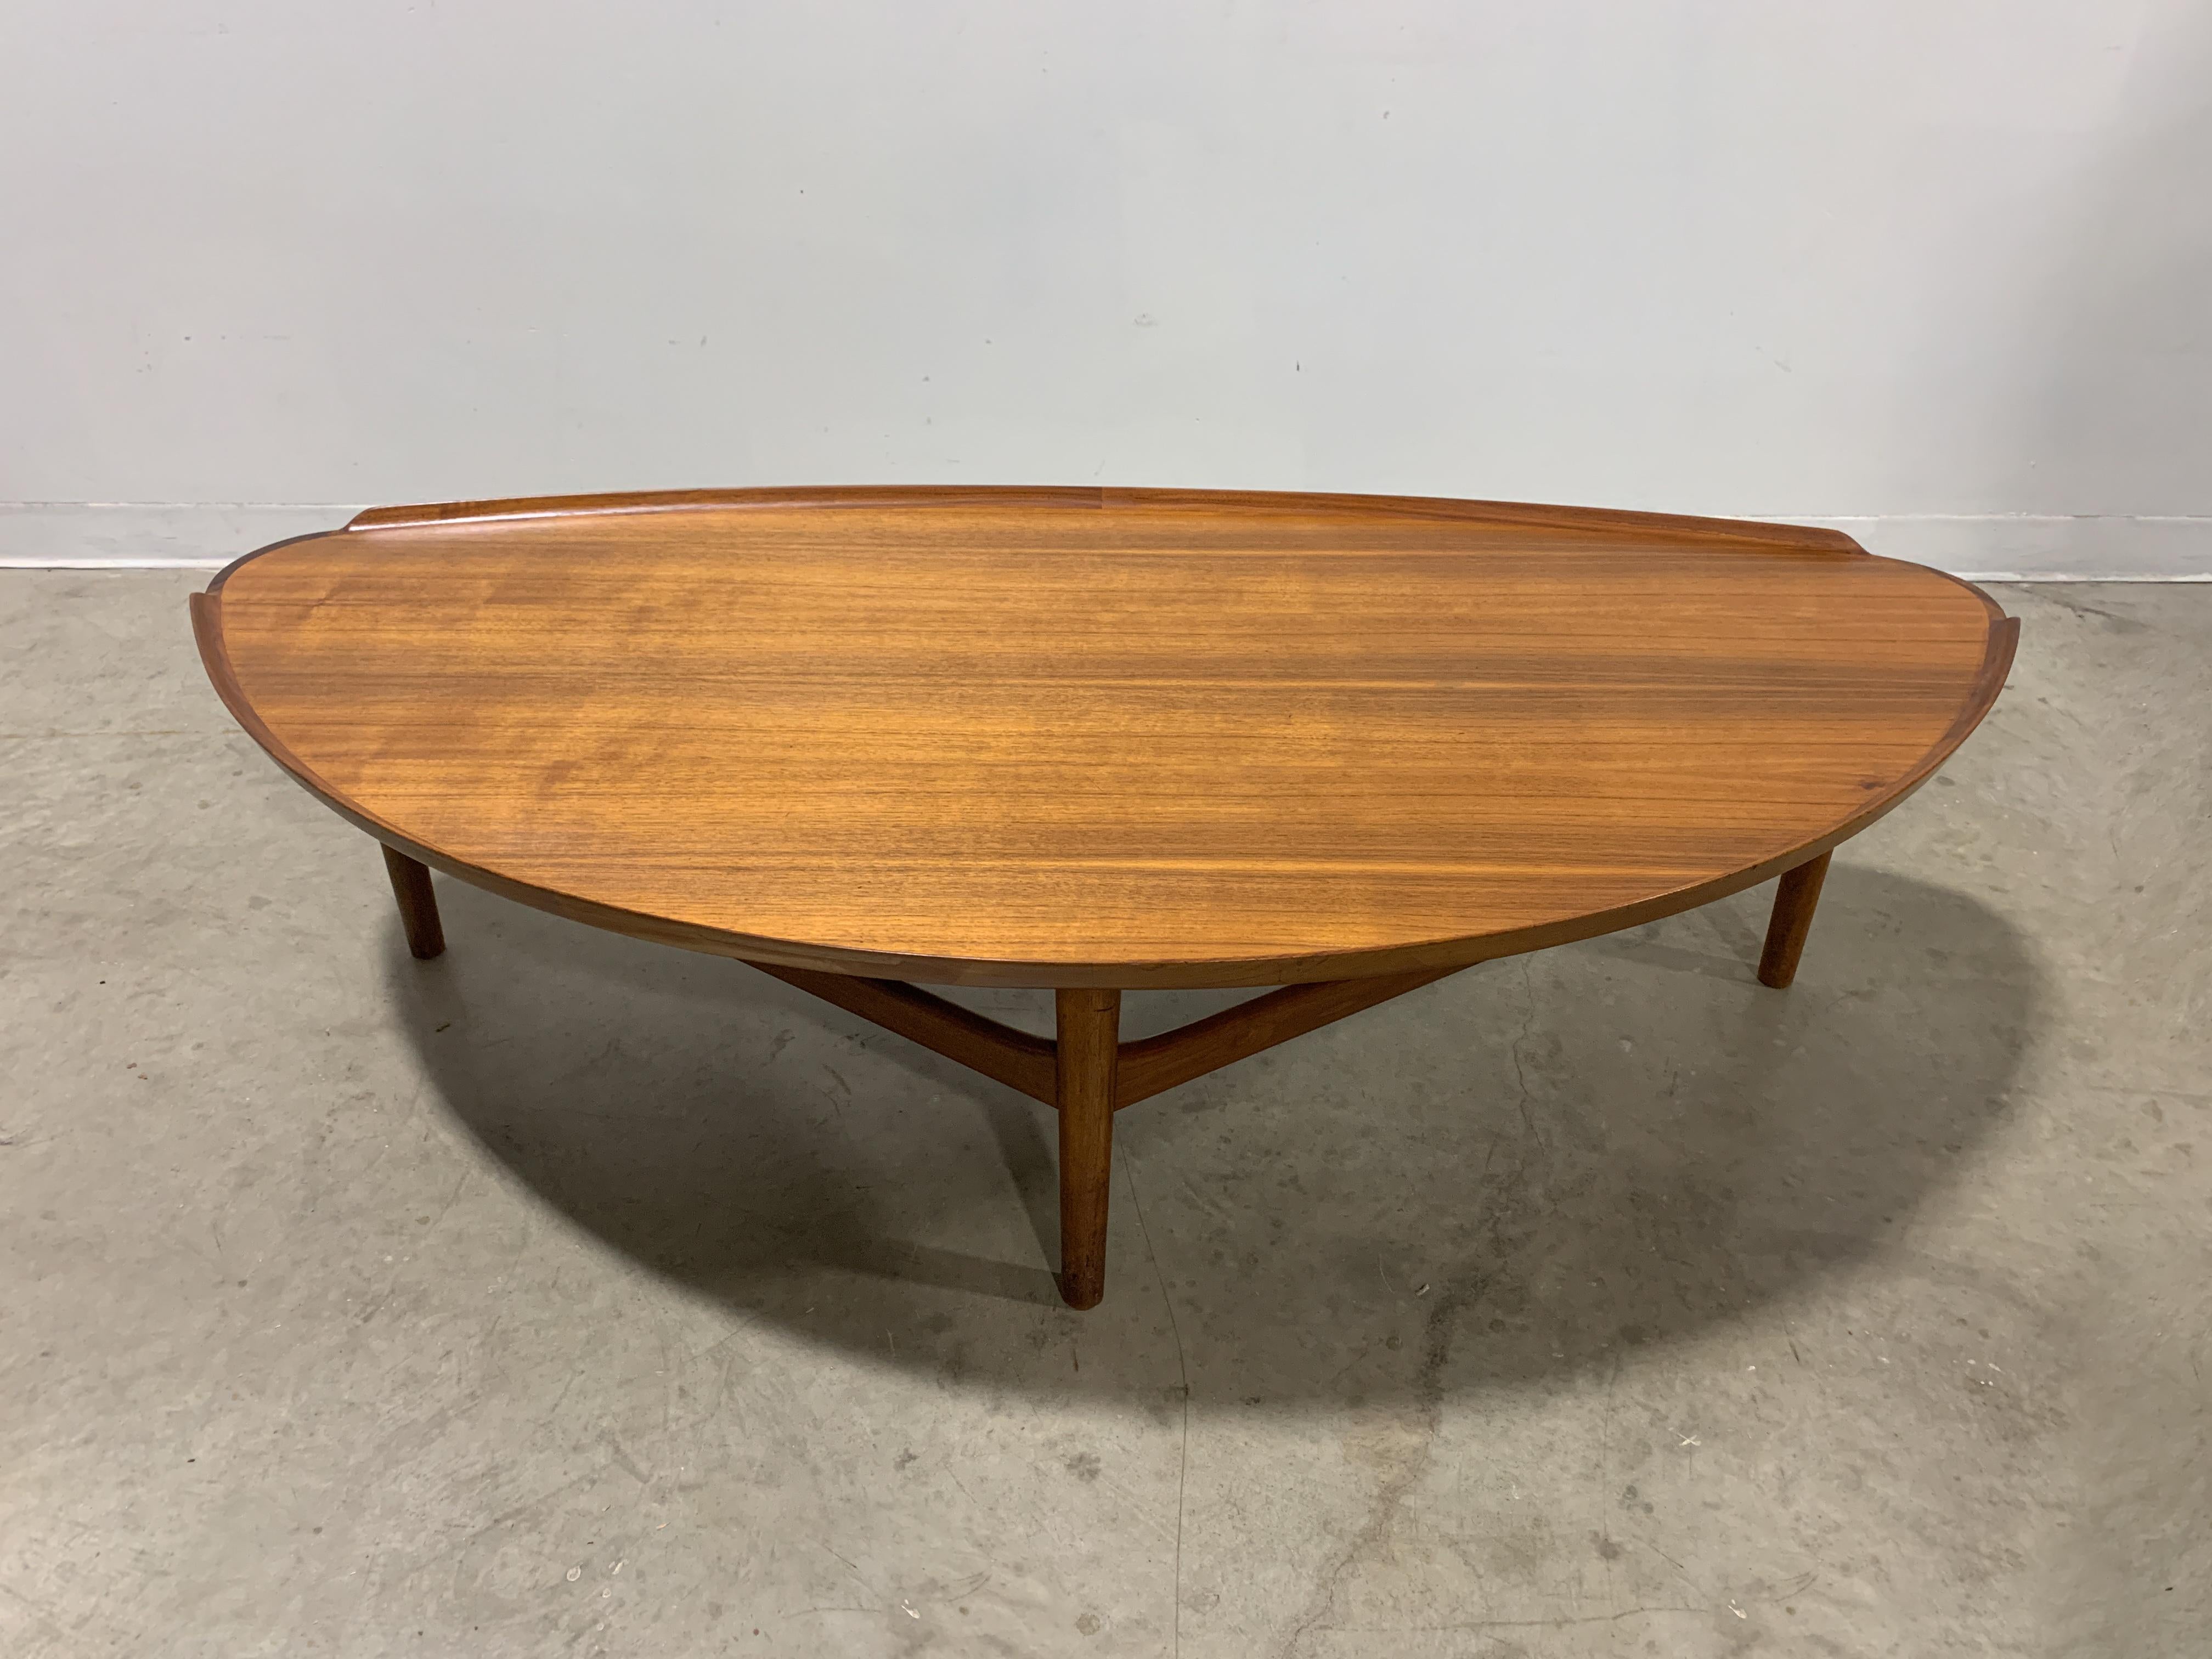 Beautiful and rare walnut table designed by Finn Juhl and made by Baker Furniture in 1952 for their 'Baker Modern' line. Large demilune shaped table with and exquisite lip edge, gorgeous wood grain and sculptural base. Model number 521 1/2
 
This